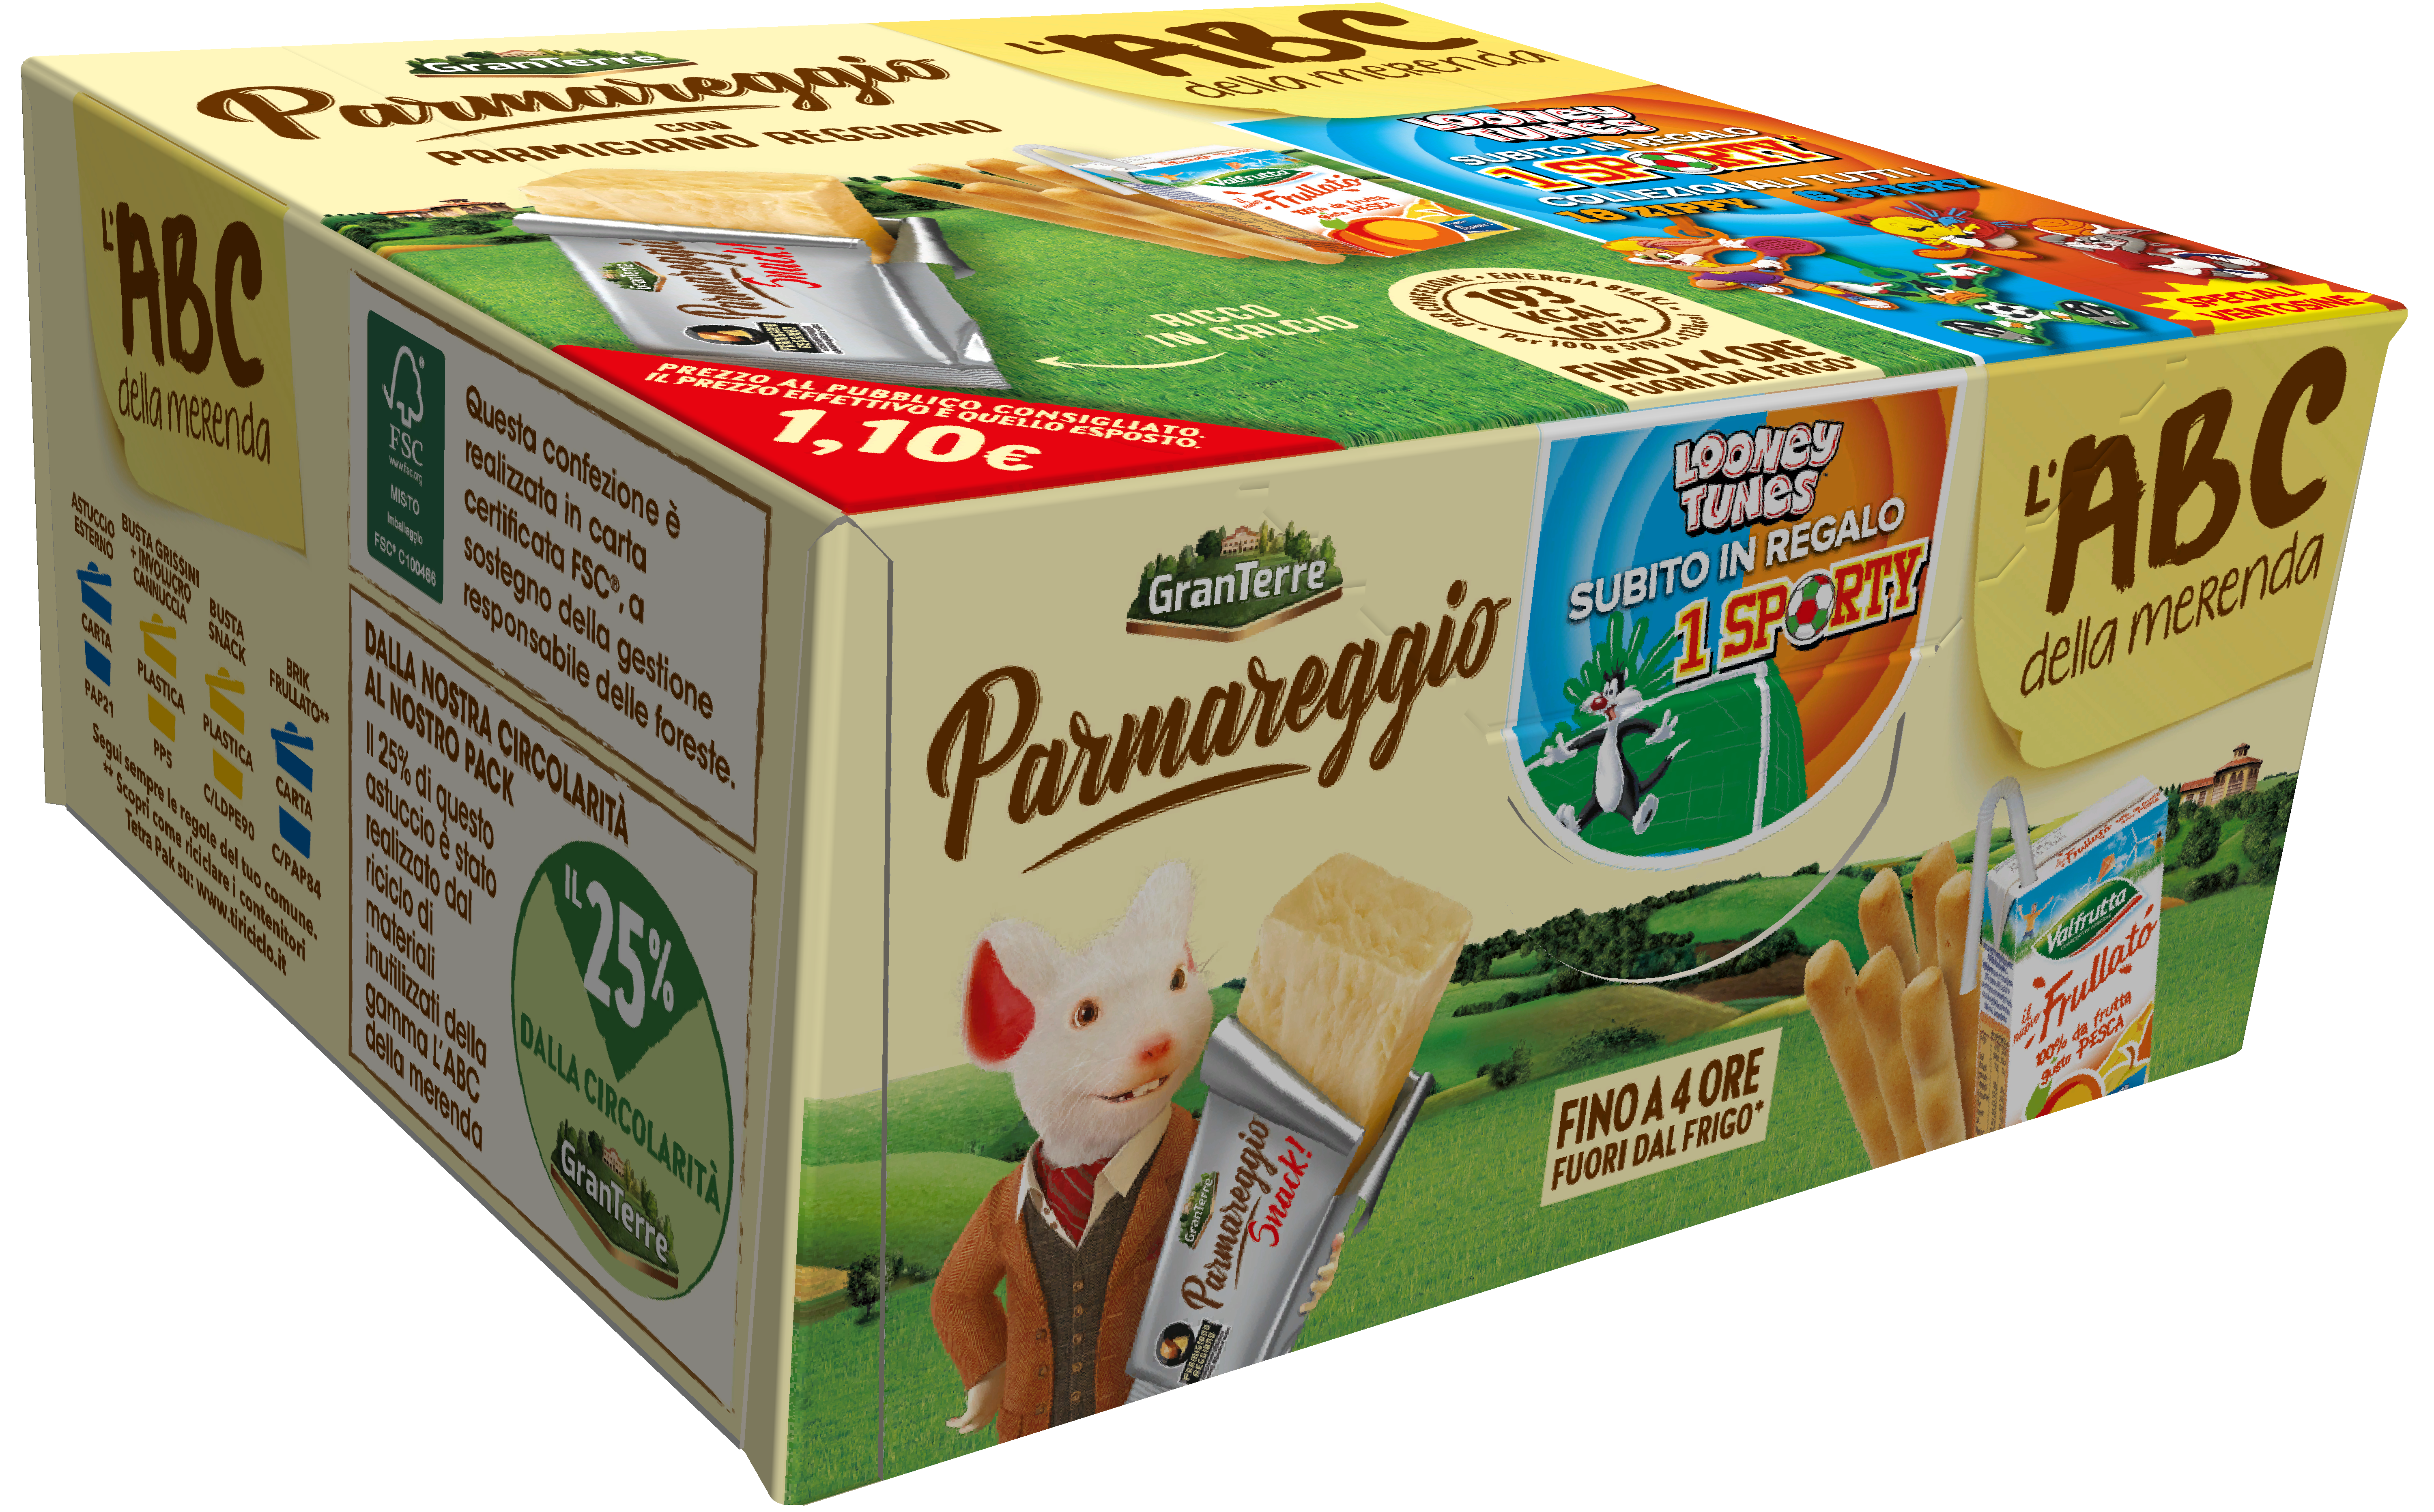 Parmareggio by Granterre, close-loop, made with own carton for recycling